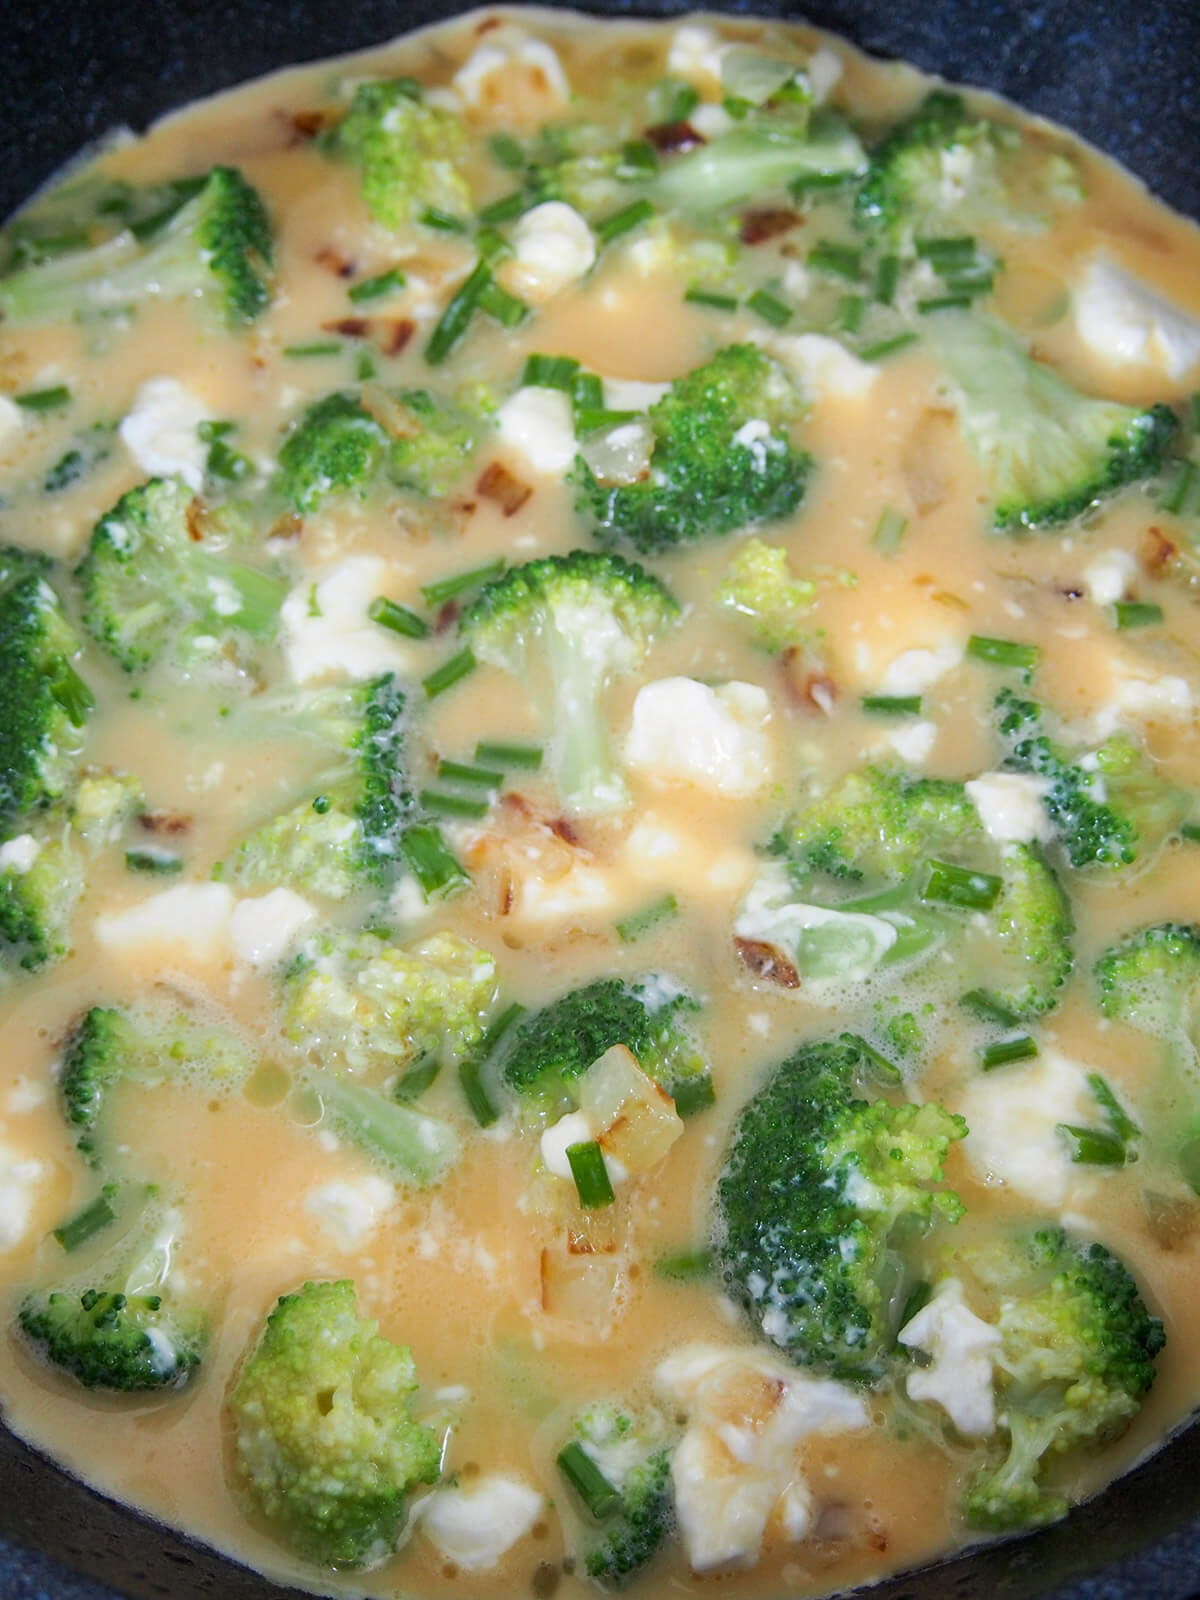 egg, broccoli and cheese mixture cooking in skillet